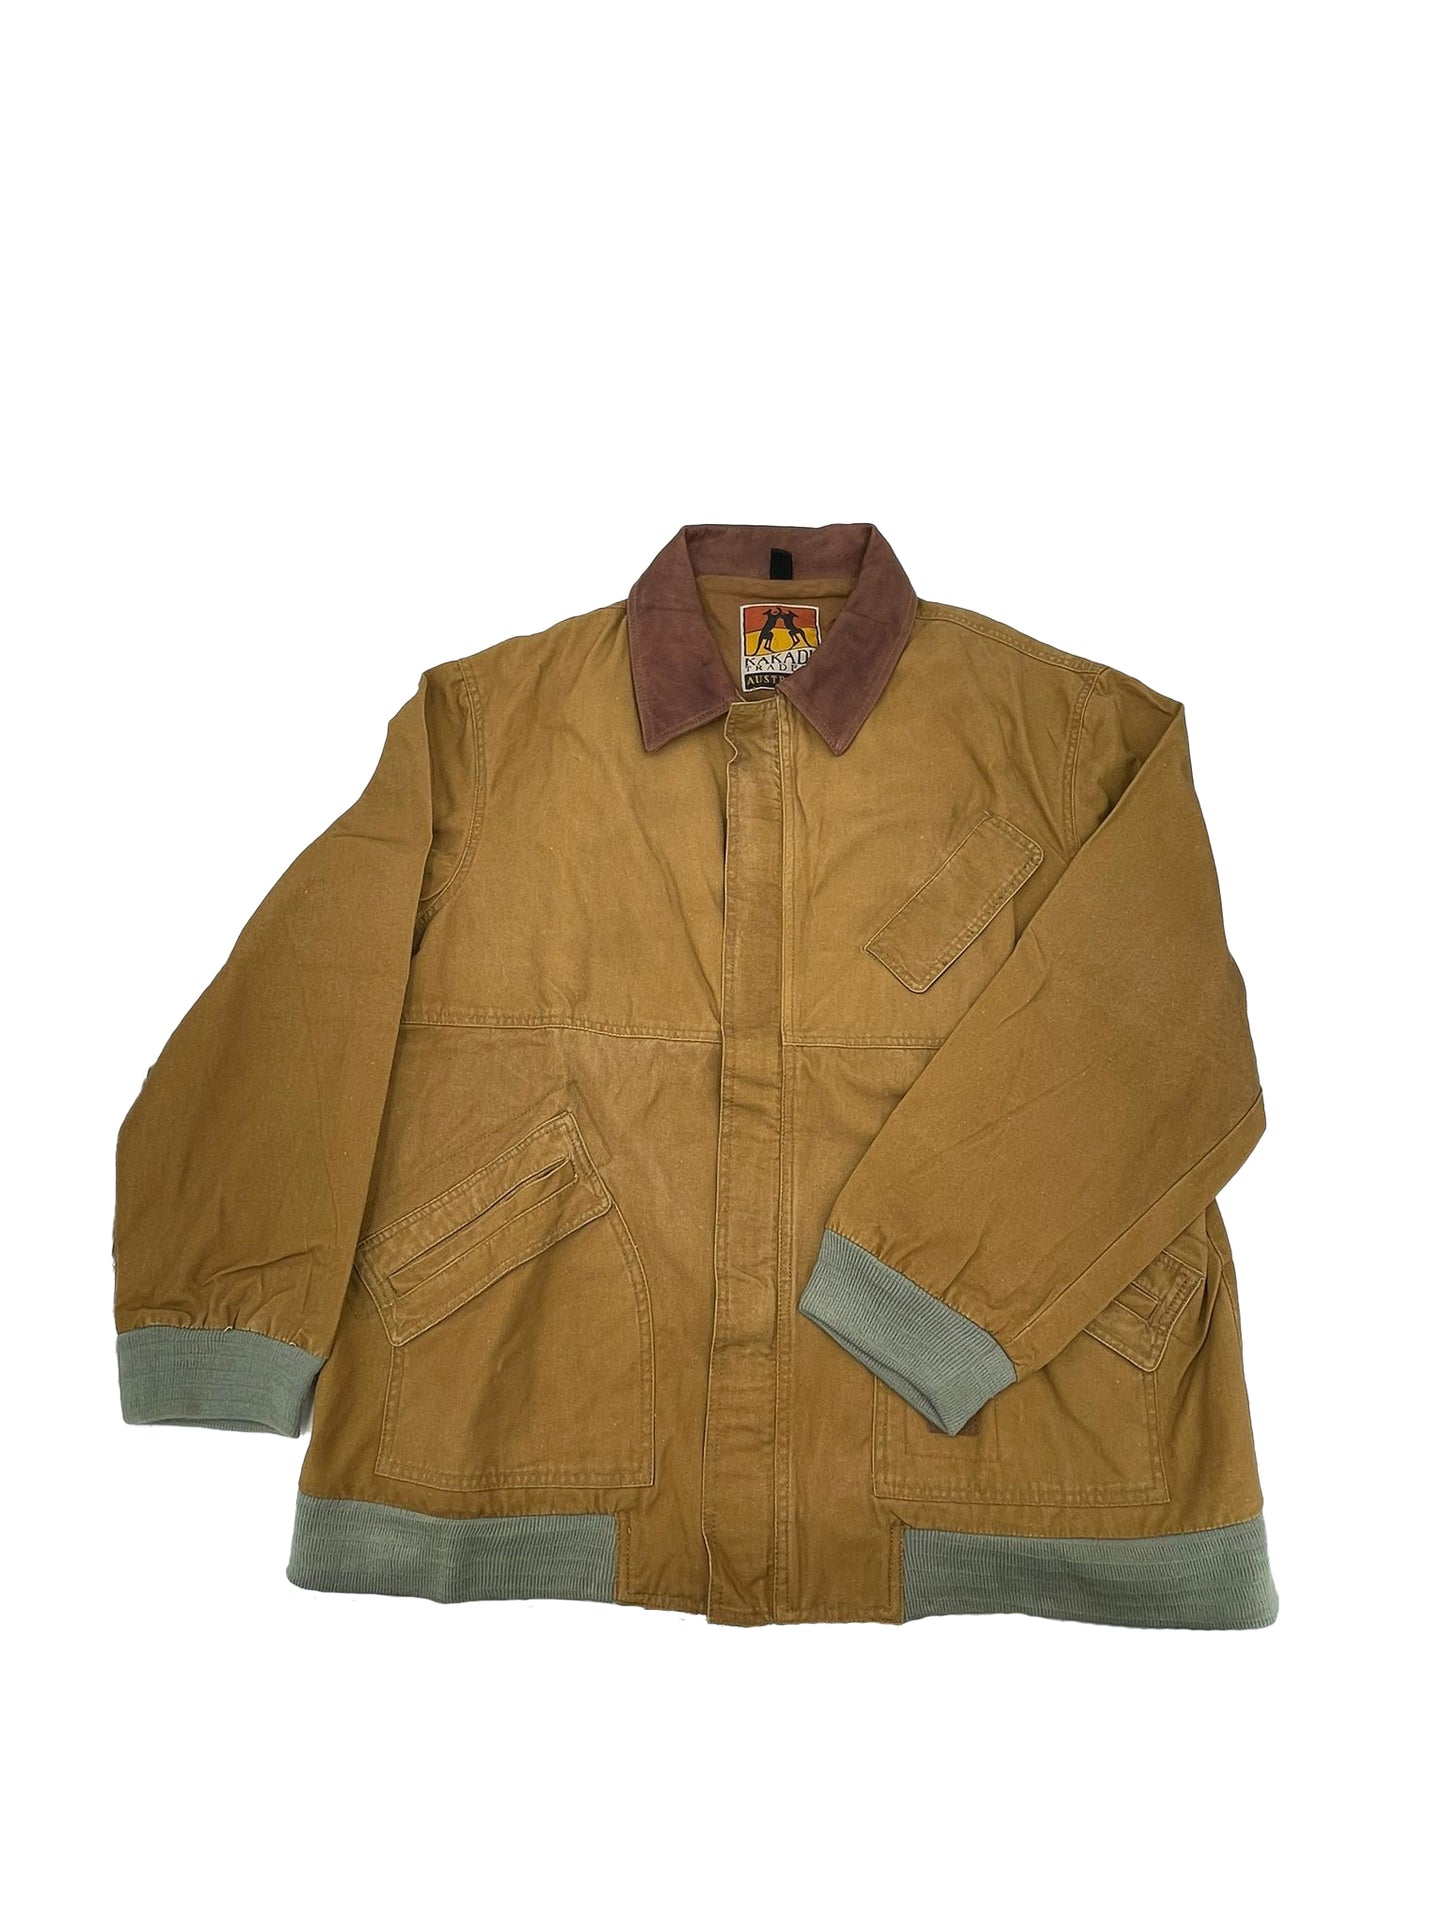 Leisure jacket Bomber Blouson Jacket with leather collar and zipper in Loden and Khaki